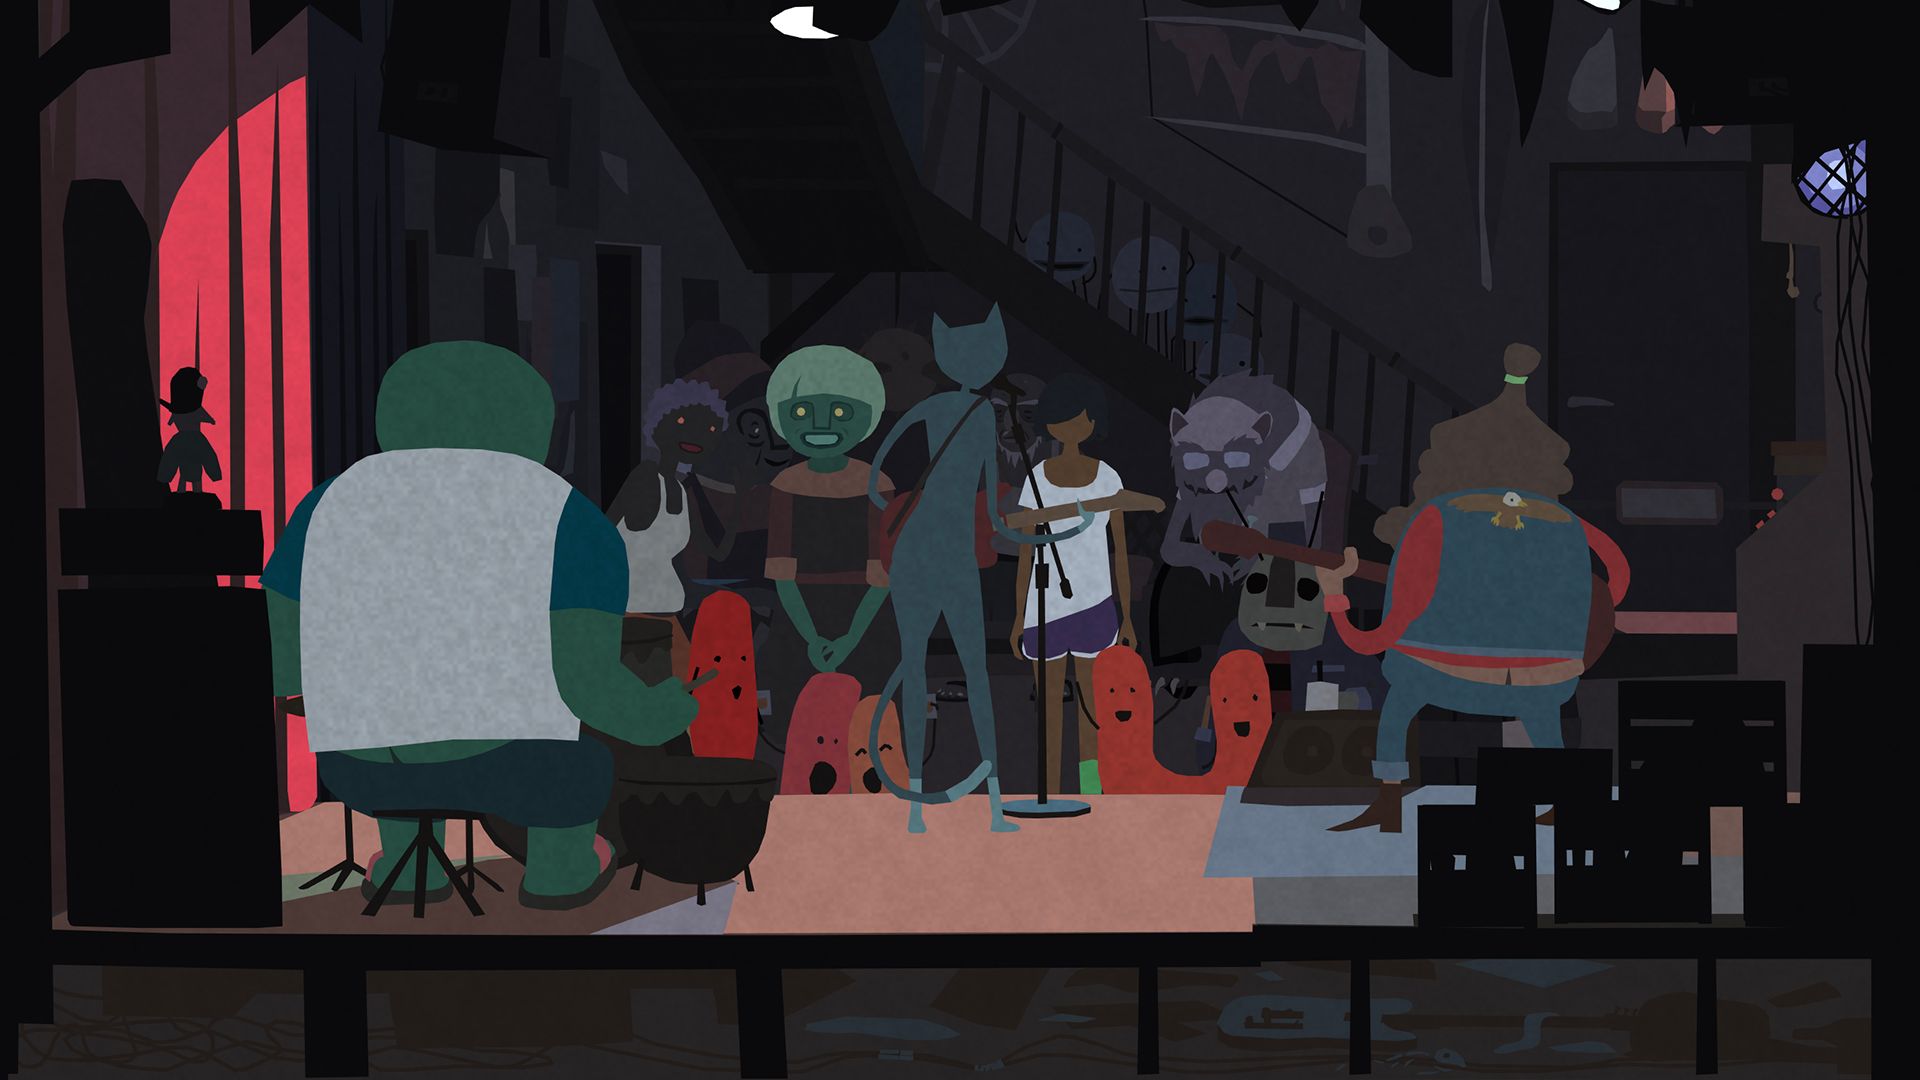 A screenshot from Mutazione which shows a number of characters gathered around a band as they play rock music